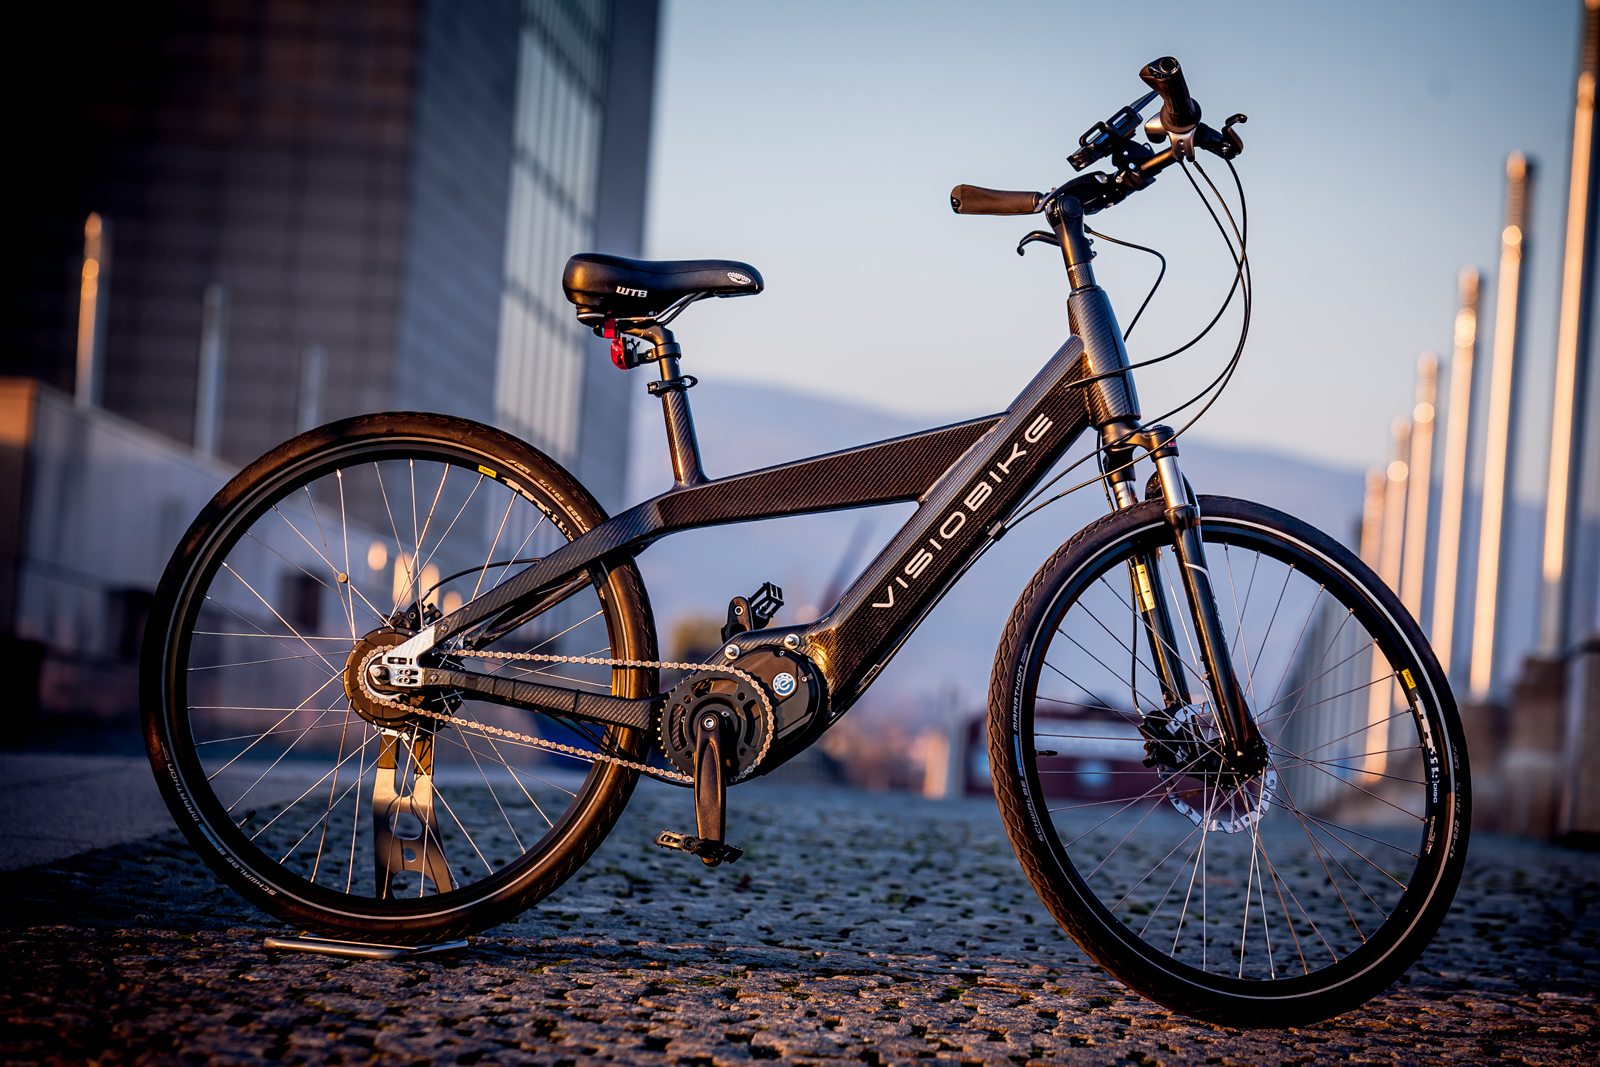 visiobike connected electric bicycle ebike